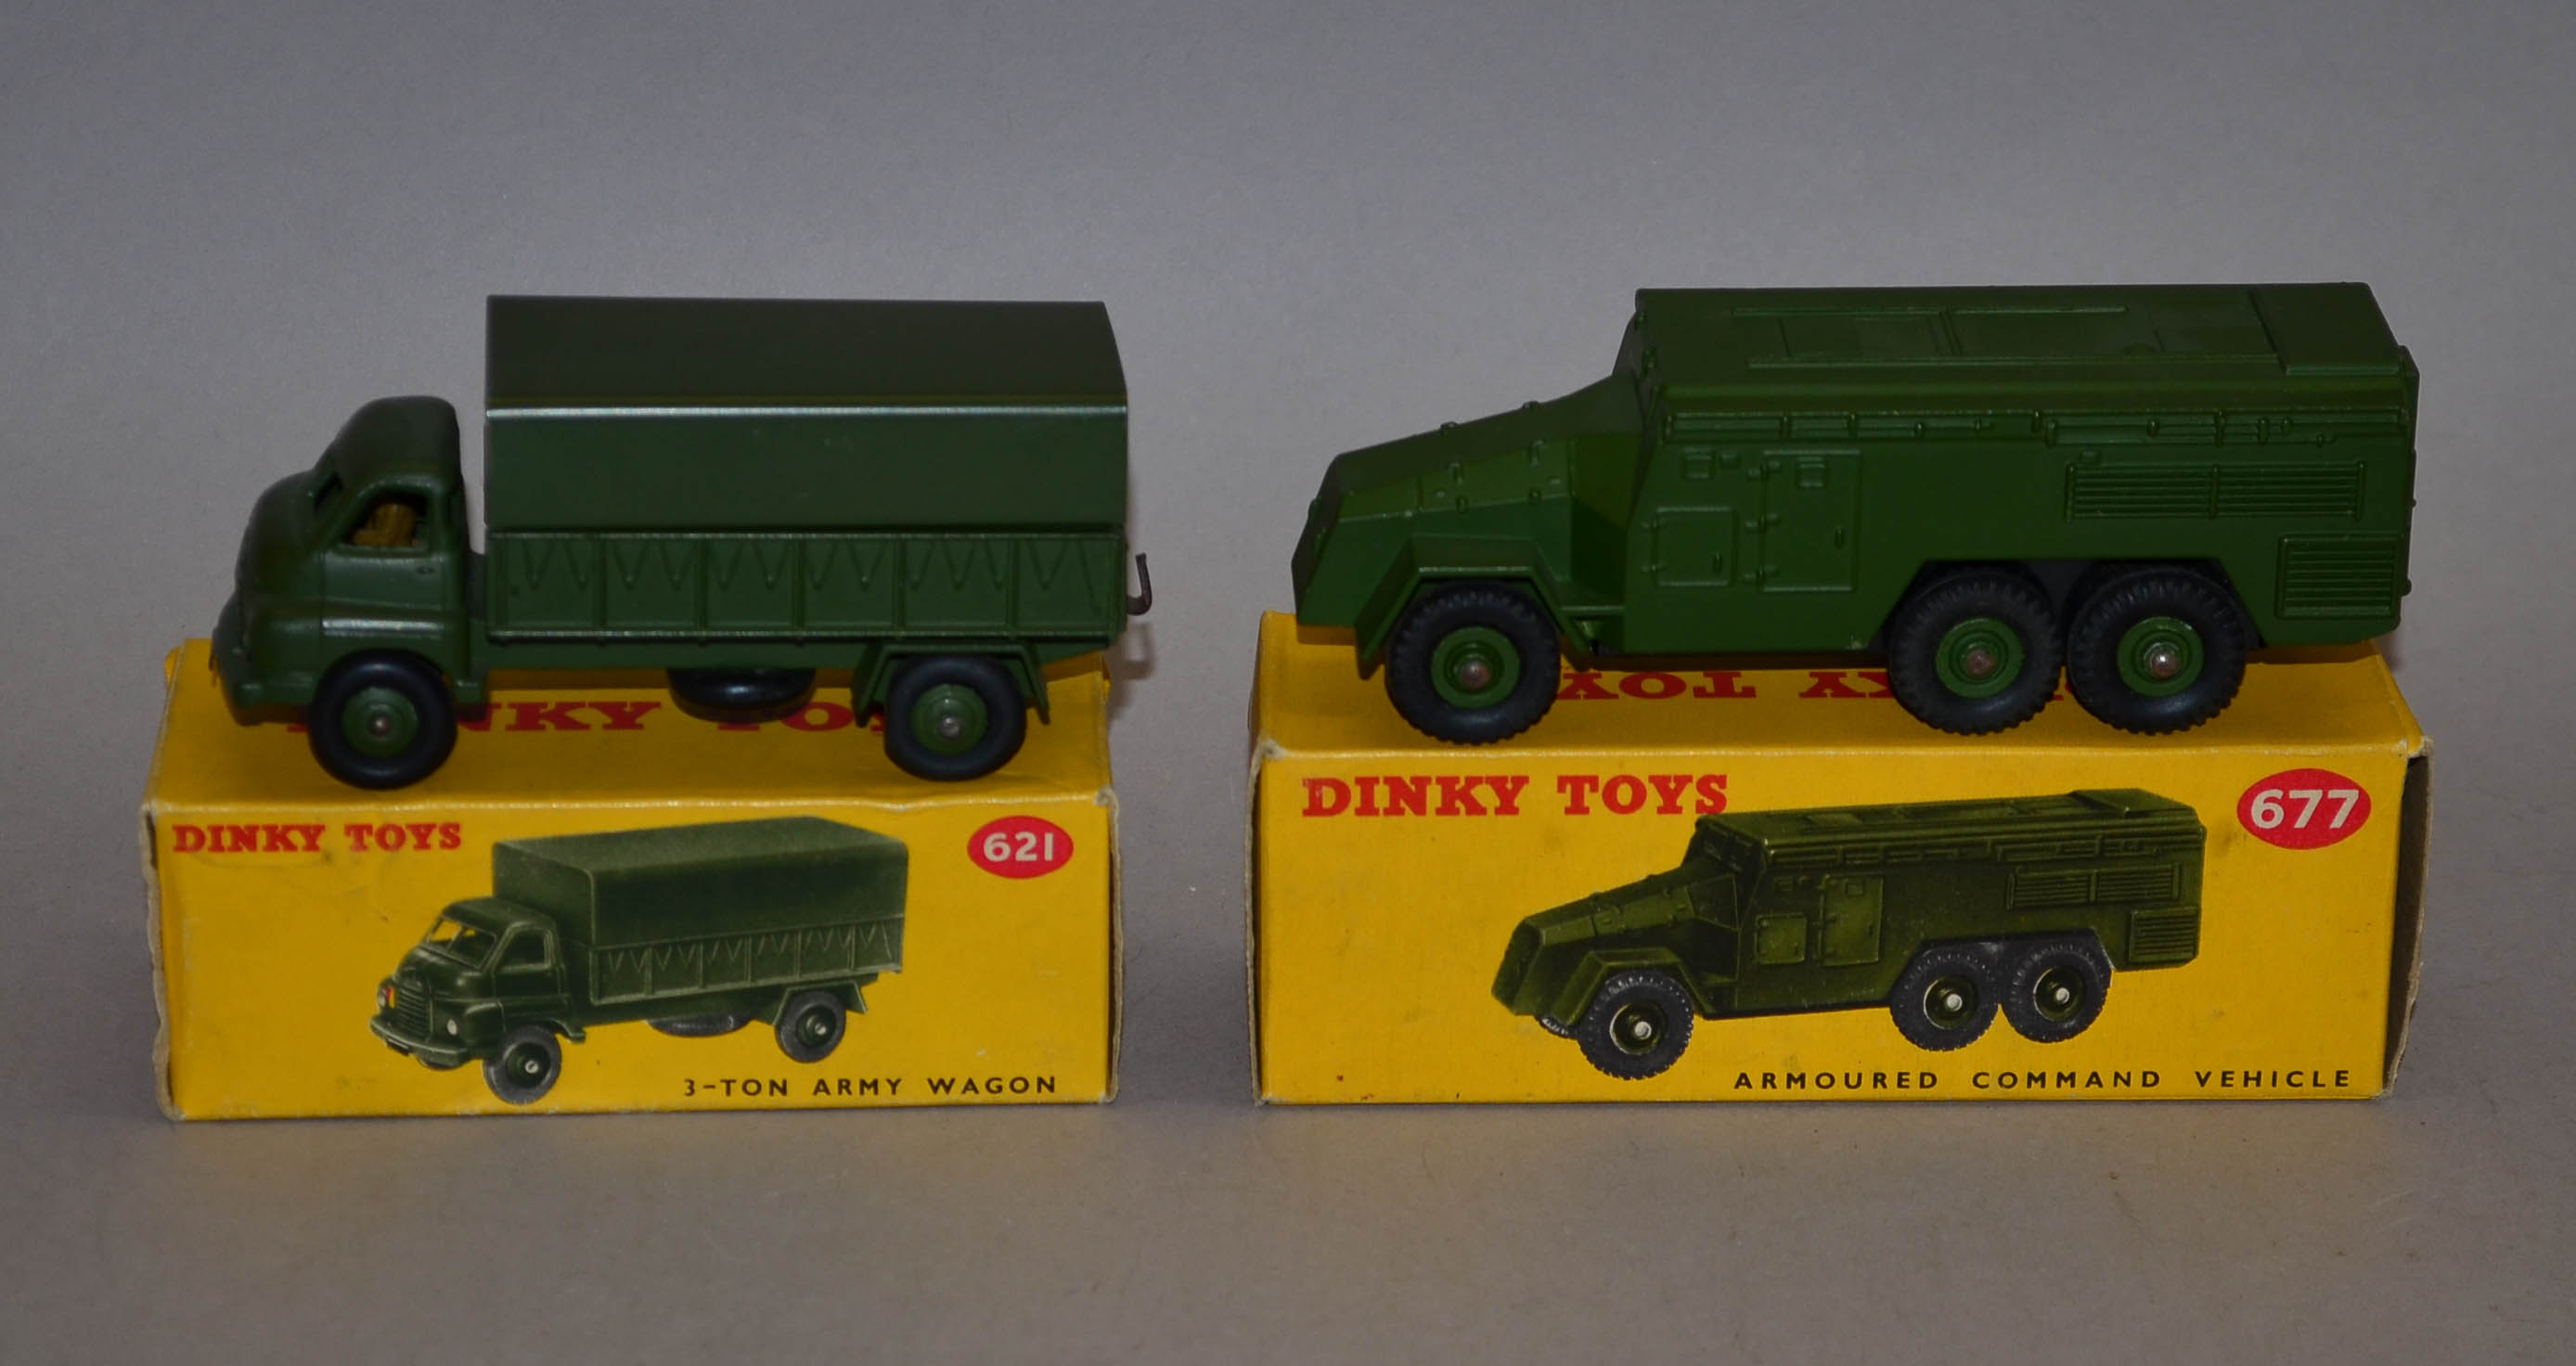 Two Dinky Toys military models: 677 Armoured Command Vehicle; 621 3-Ton Army Wagon. VG in G/VG